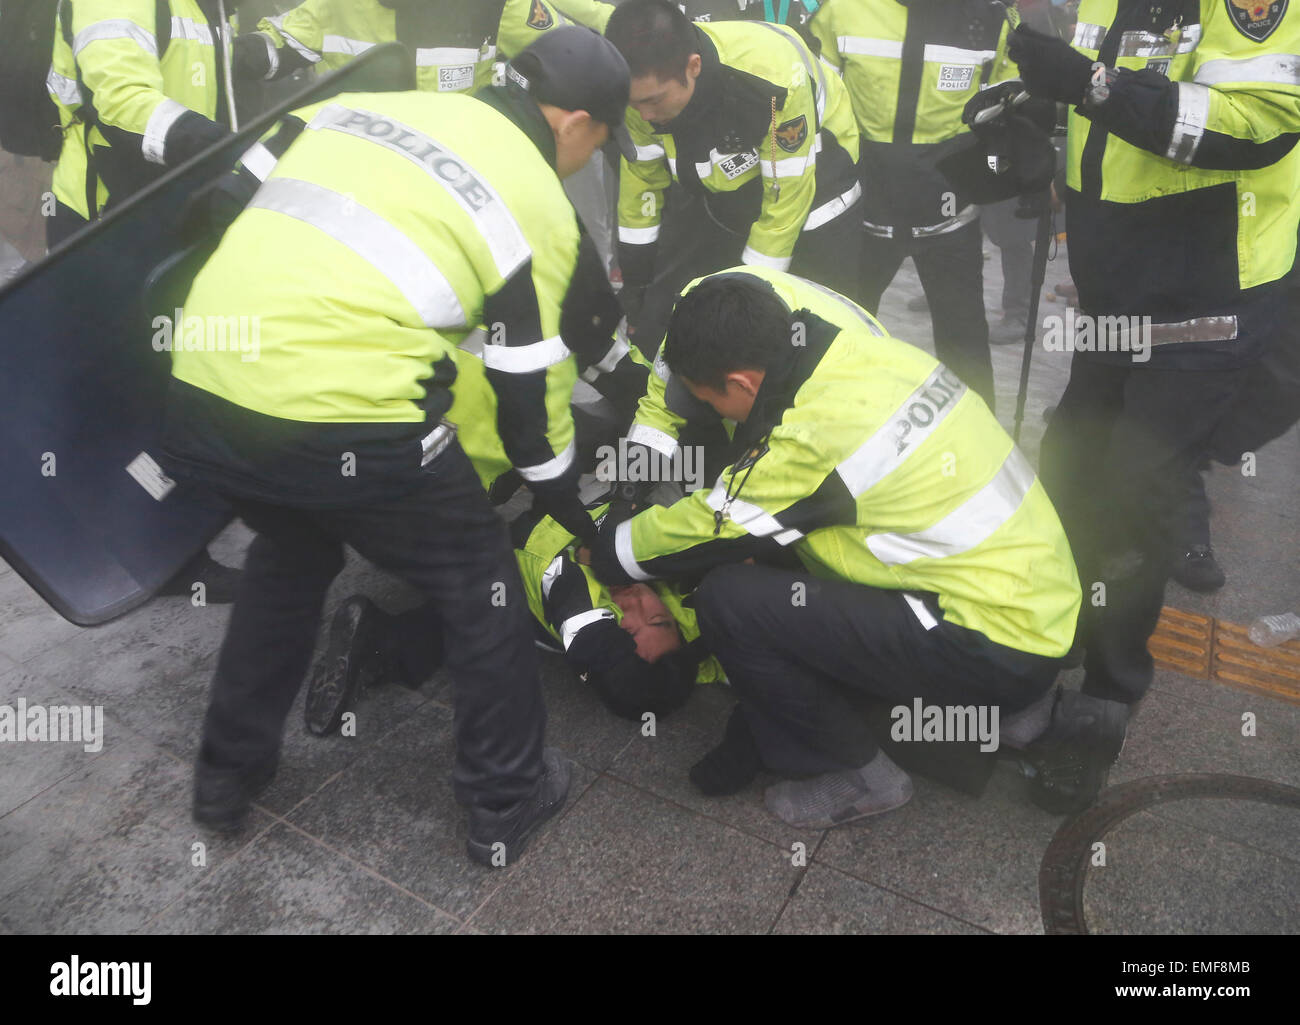 Ferry tragedy protest, Apr 18, 2015 : Policemen check one of their colleague policemen injured as they block protesters trying to march toward Gwanghwamun gate near the presidential Blue House in Seoul, South Korea. About 30,000 people (8,000 by police estimate) demonstrated on April 18, two days after the first anniversary of Sewol ferry tragedy to demand that the government scrap the special Sewol Law enforcement decree, salvage the ferry and hold a thorough investigation into the tragedy. They also called for resignation of President Park Geun-hye.The police detained about 100 protesters Stock Photo